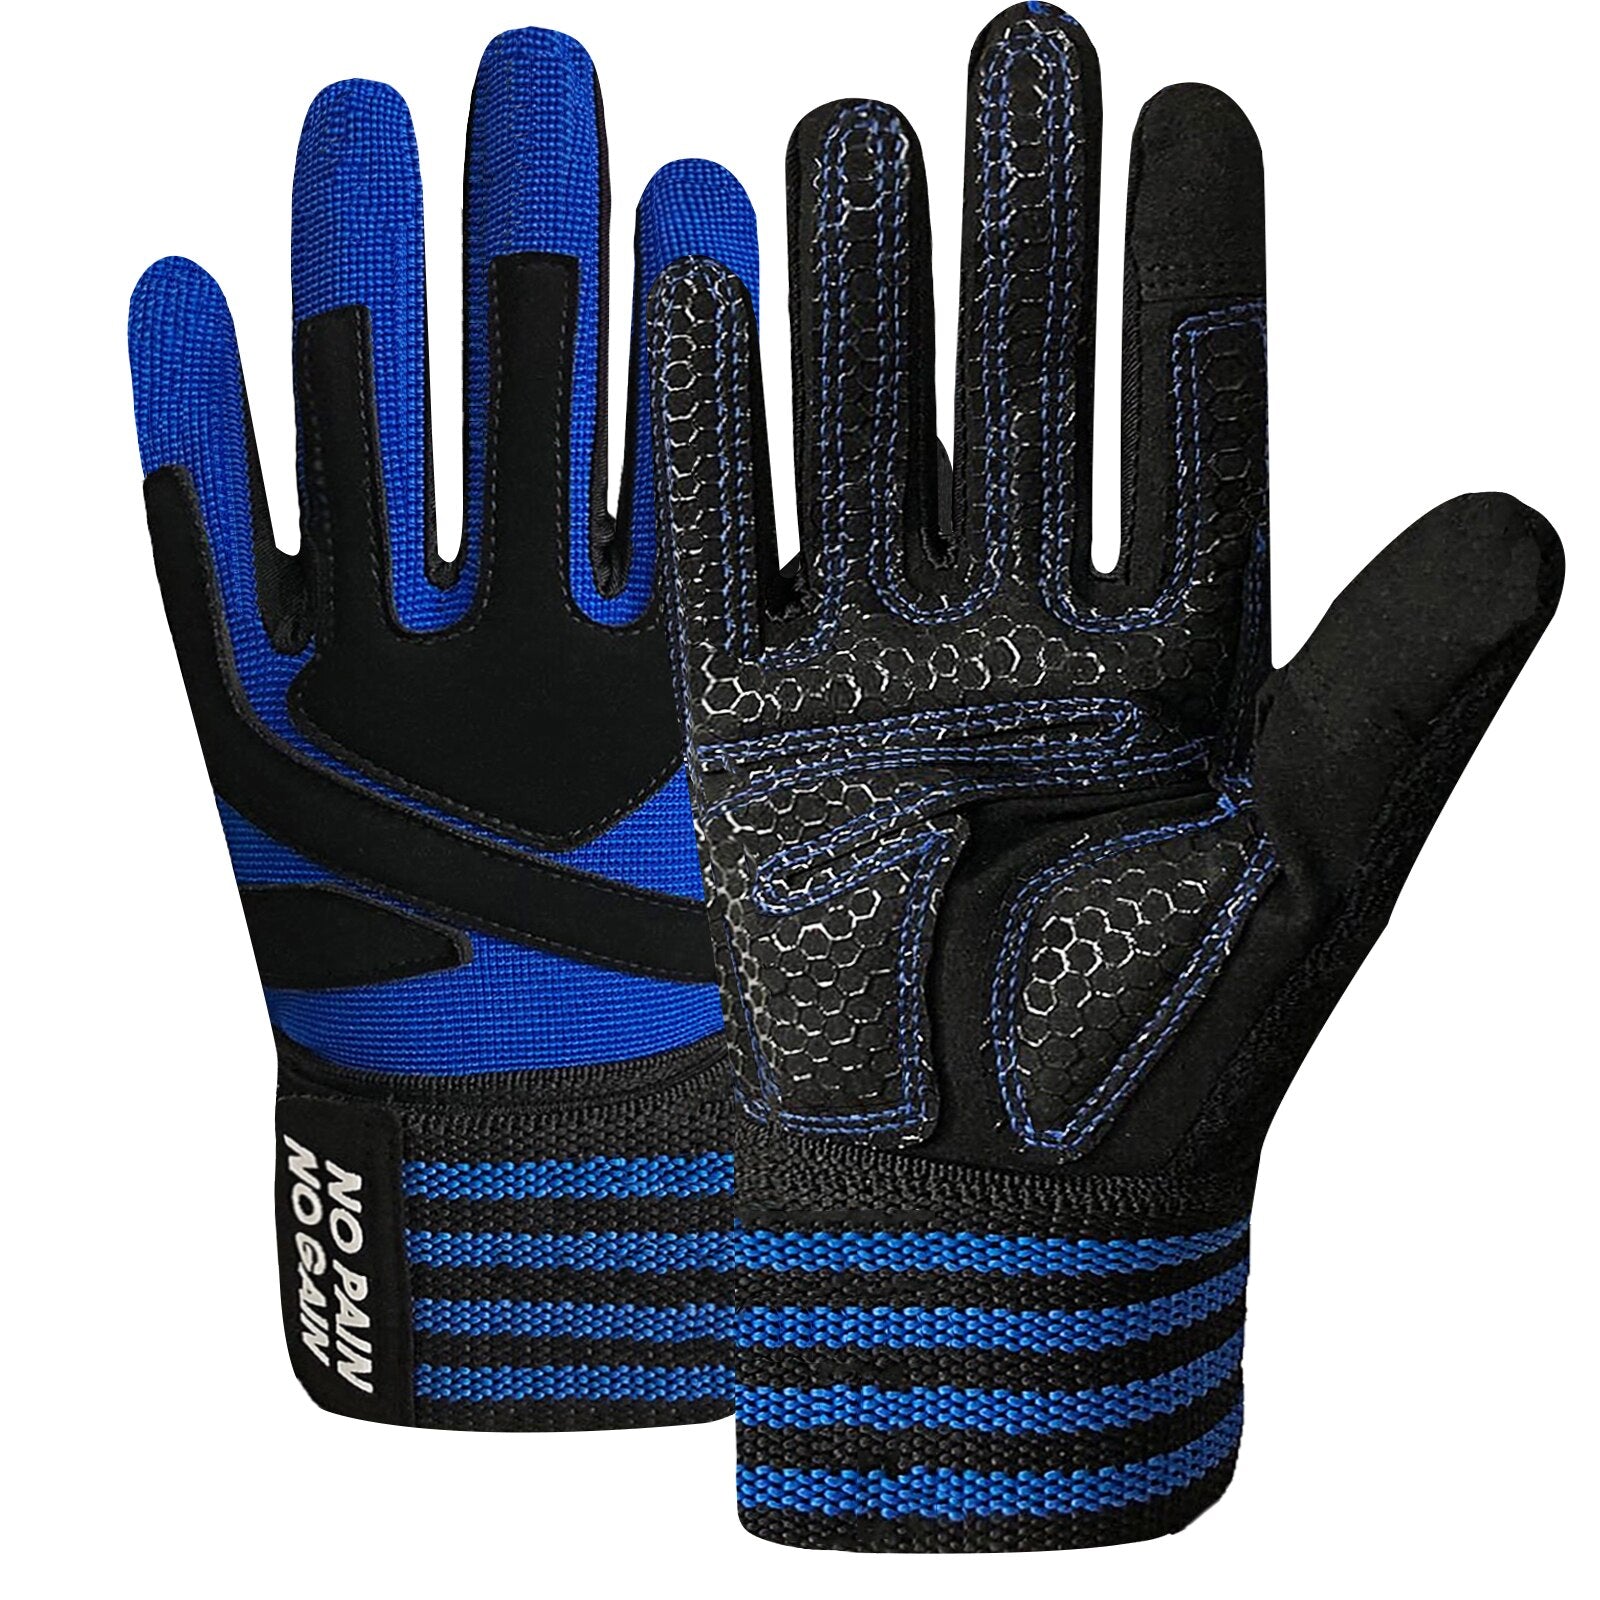 Weightlifting and Fitness Glove with Full Finger Design